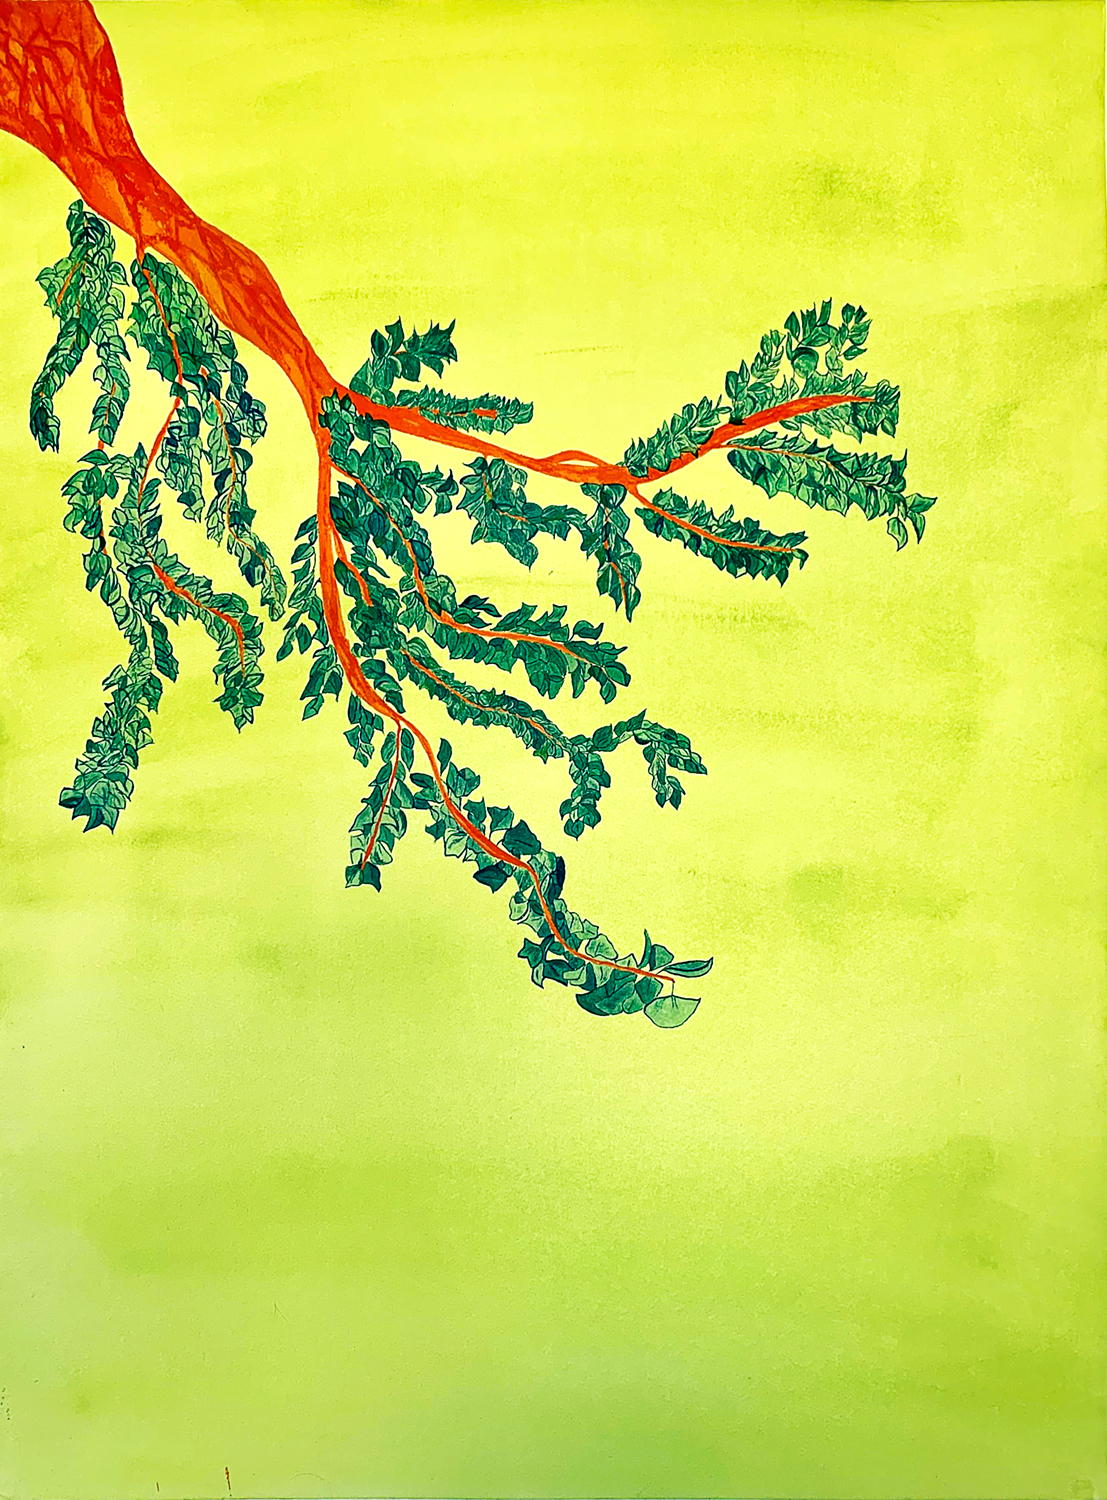 Watercolor painting with red branch and blue leaves